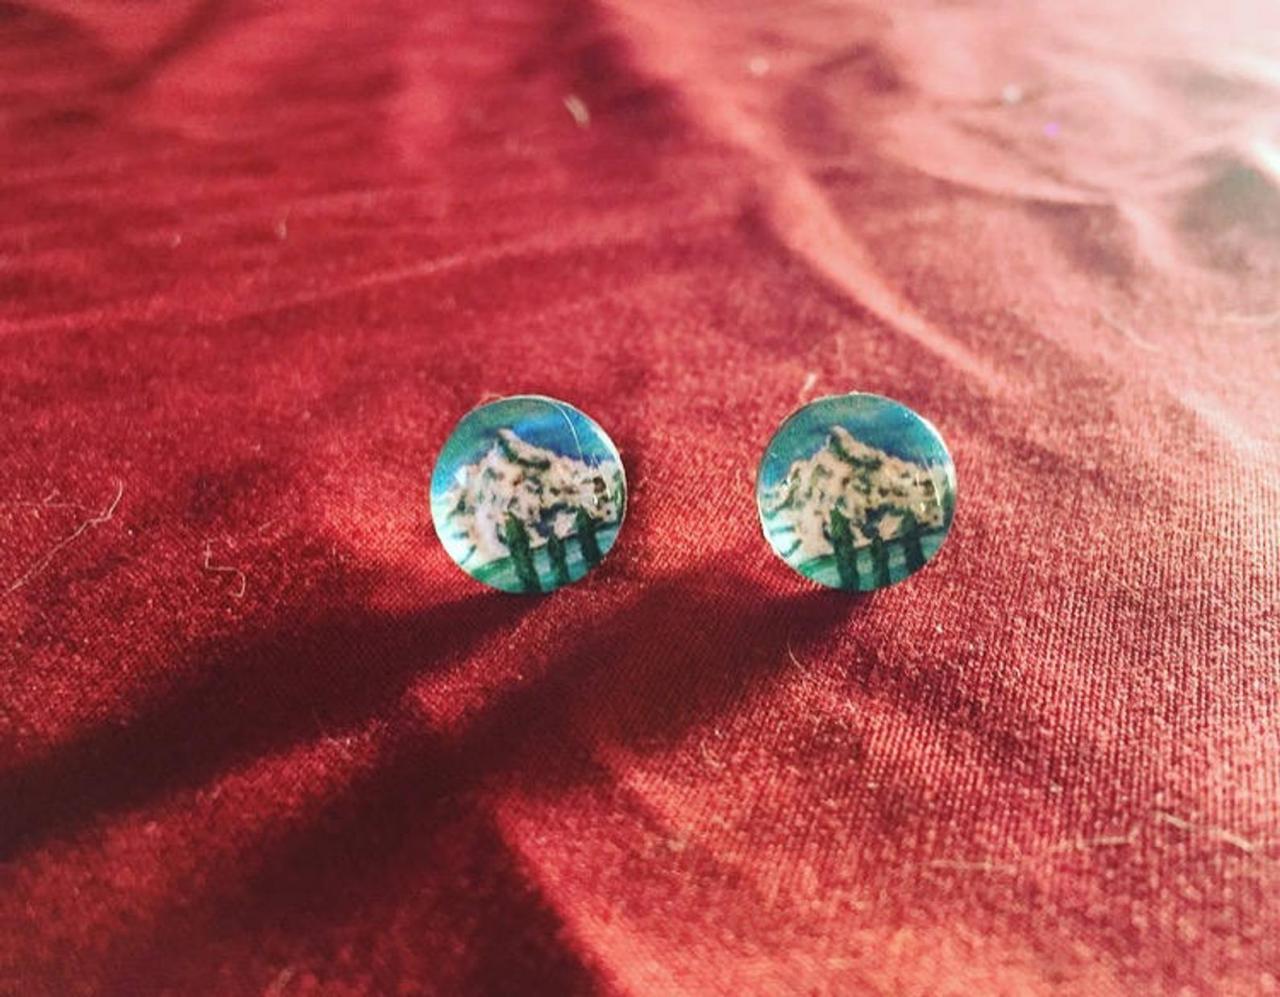 Mount Victoria Glass Studs Stud Earrings;the Mountains Are Calling; Mountain Jewelry; Dainty Earrings